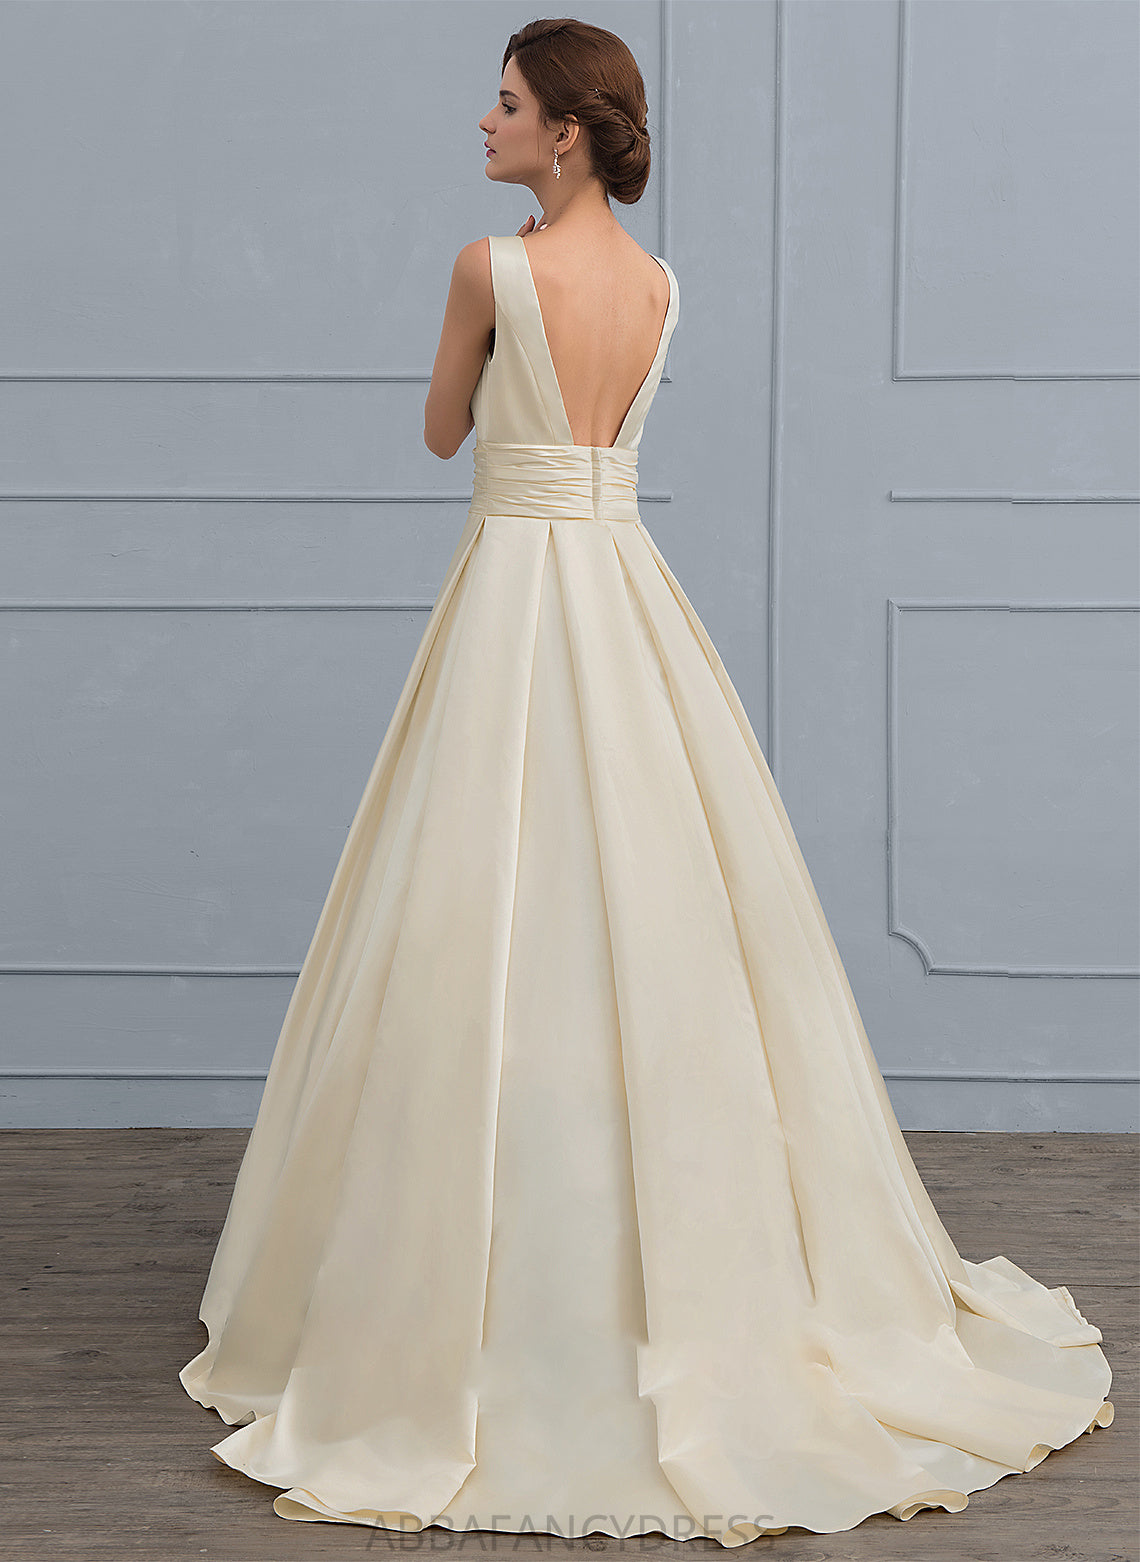 V-neck Blanche With Satin Train Wedding Wedding Dresses Dress Sweep Ball-Gown/Princess Lace